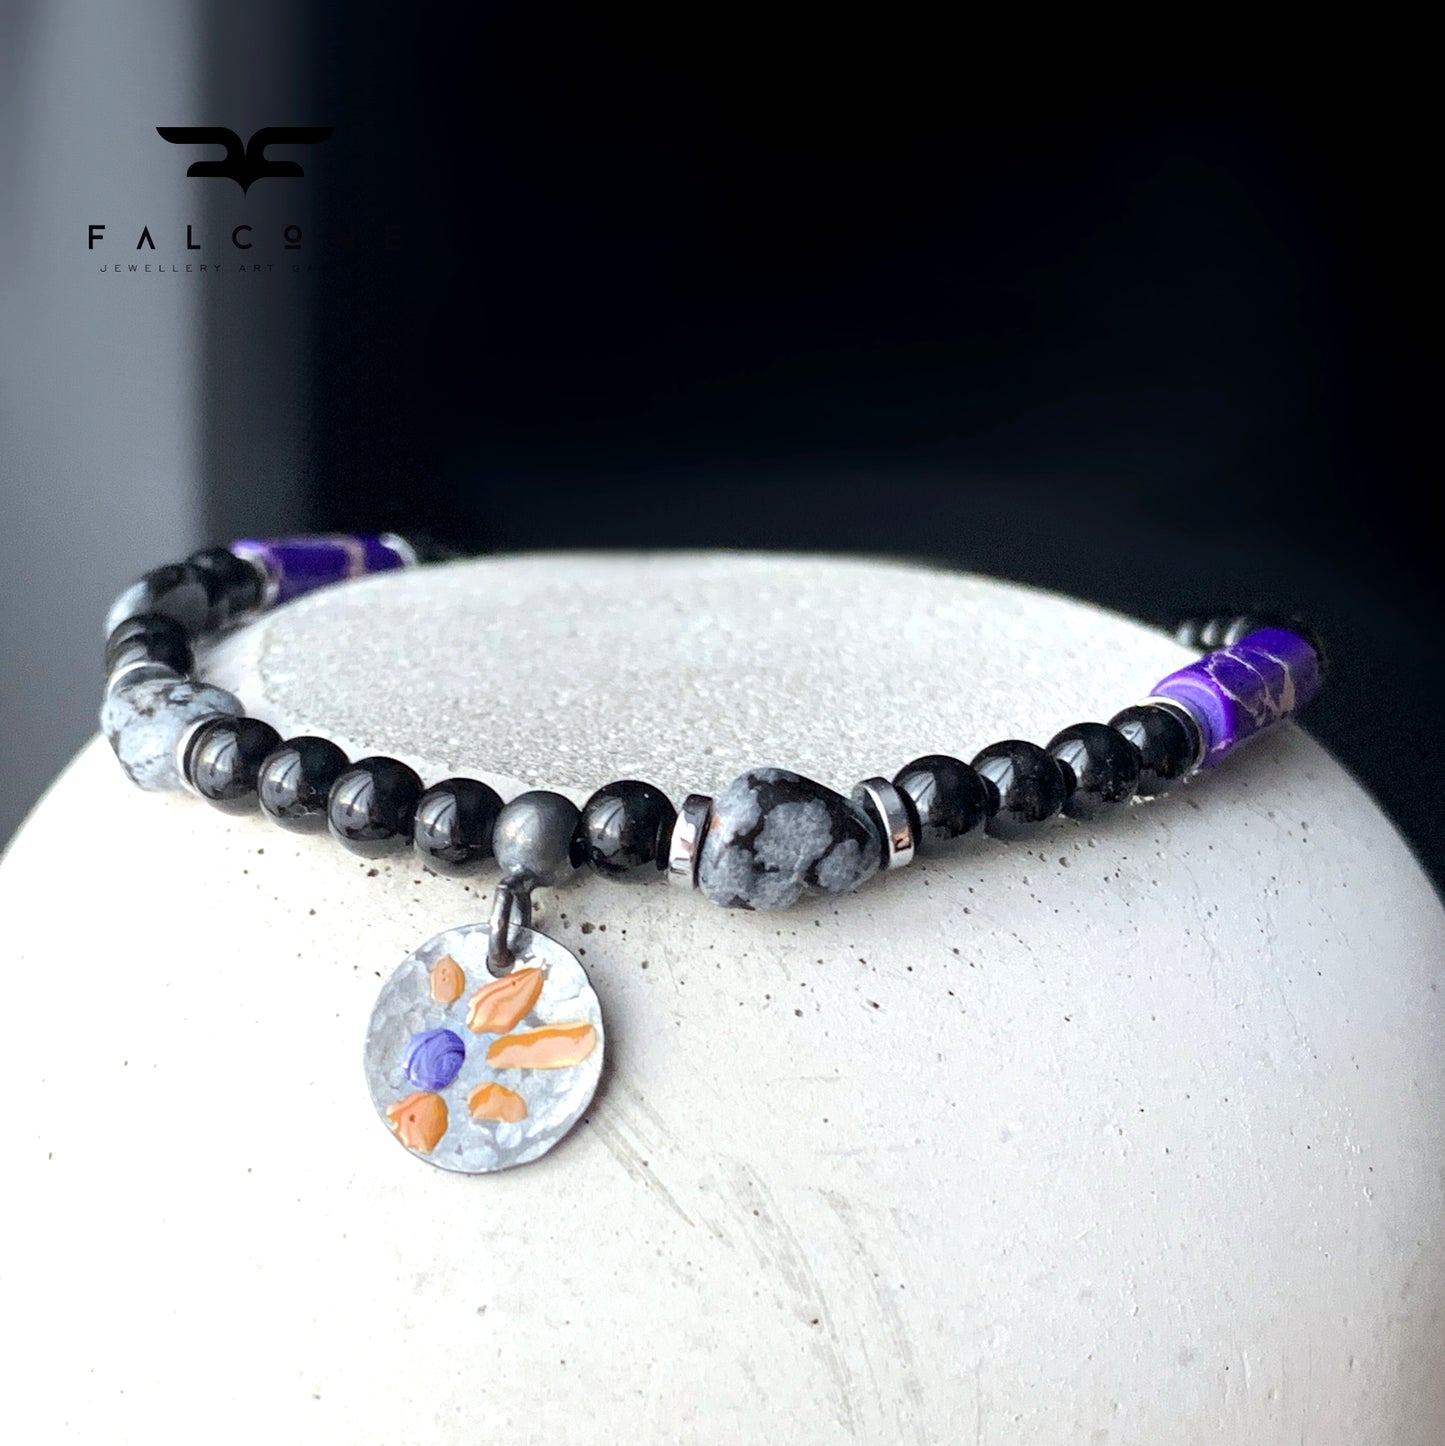 Bracelet of obsidian, imperial jasper and onyx with sterling silver enameled pendant 'Dalmatian with Flower'